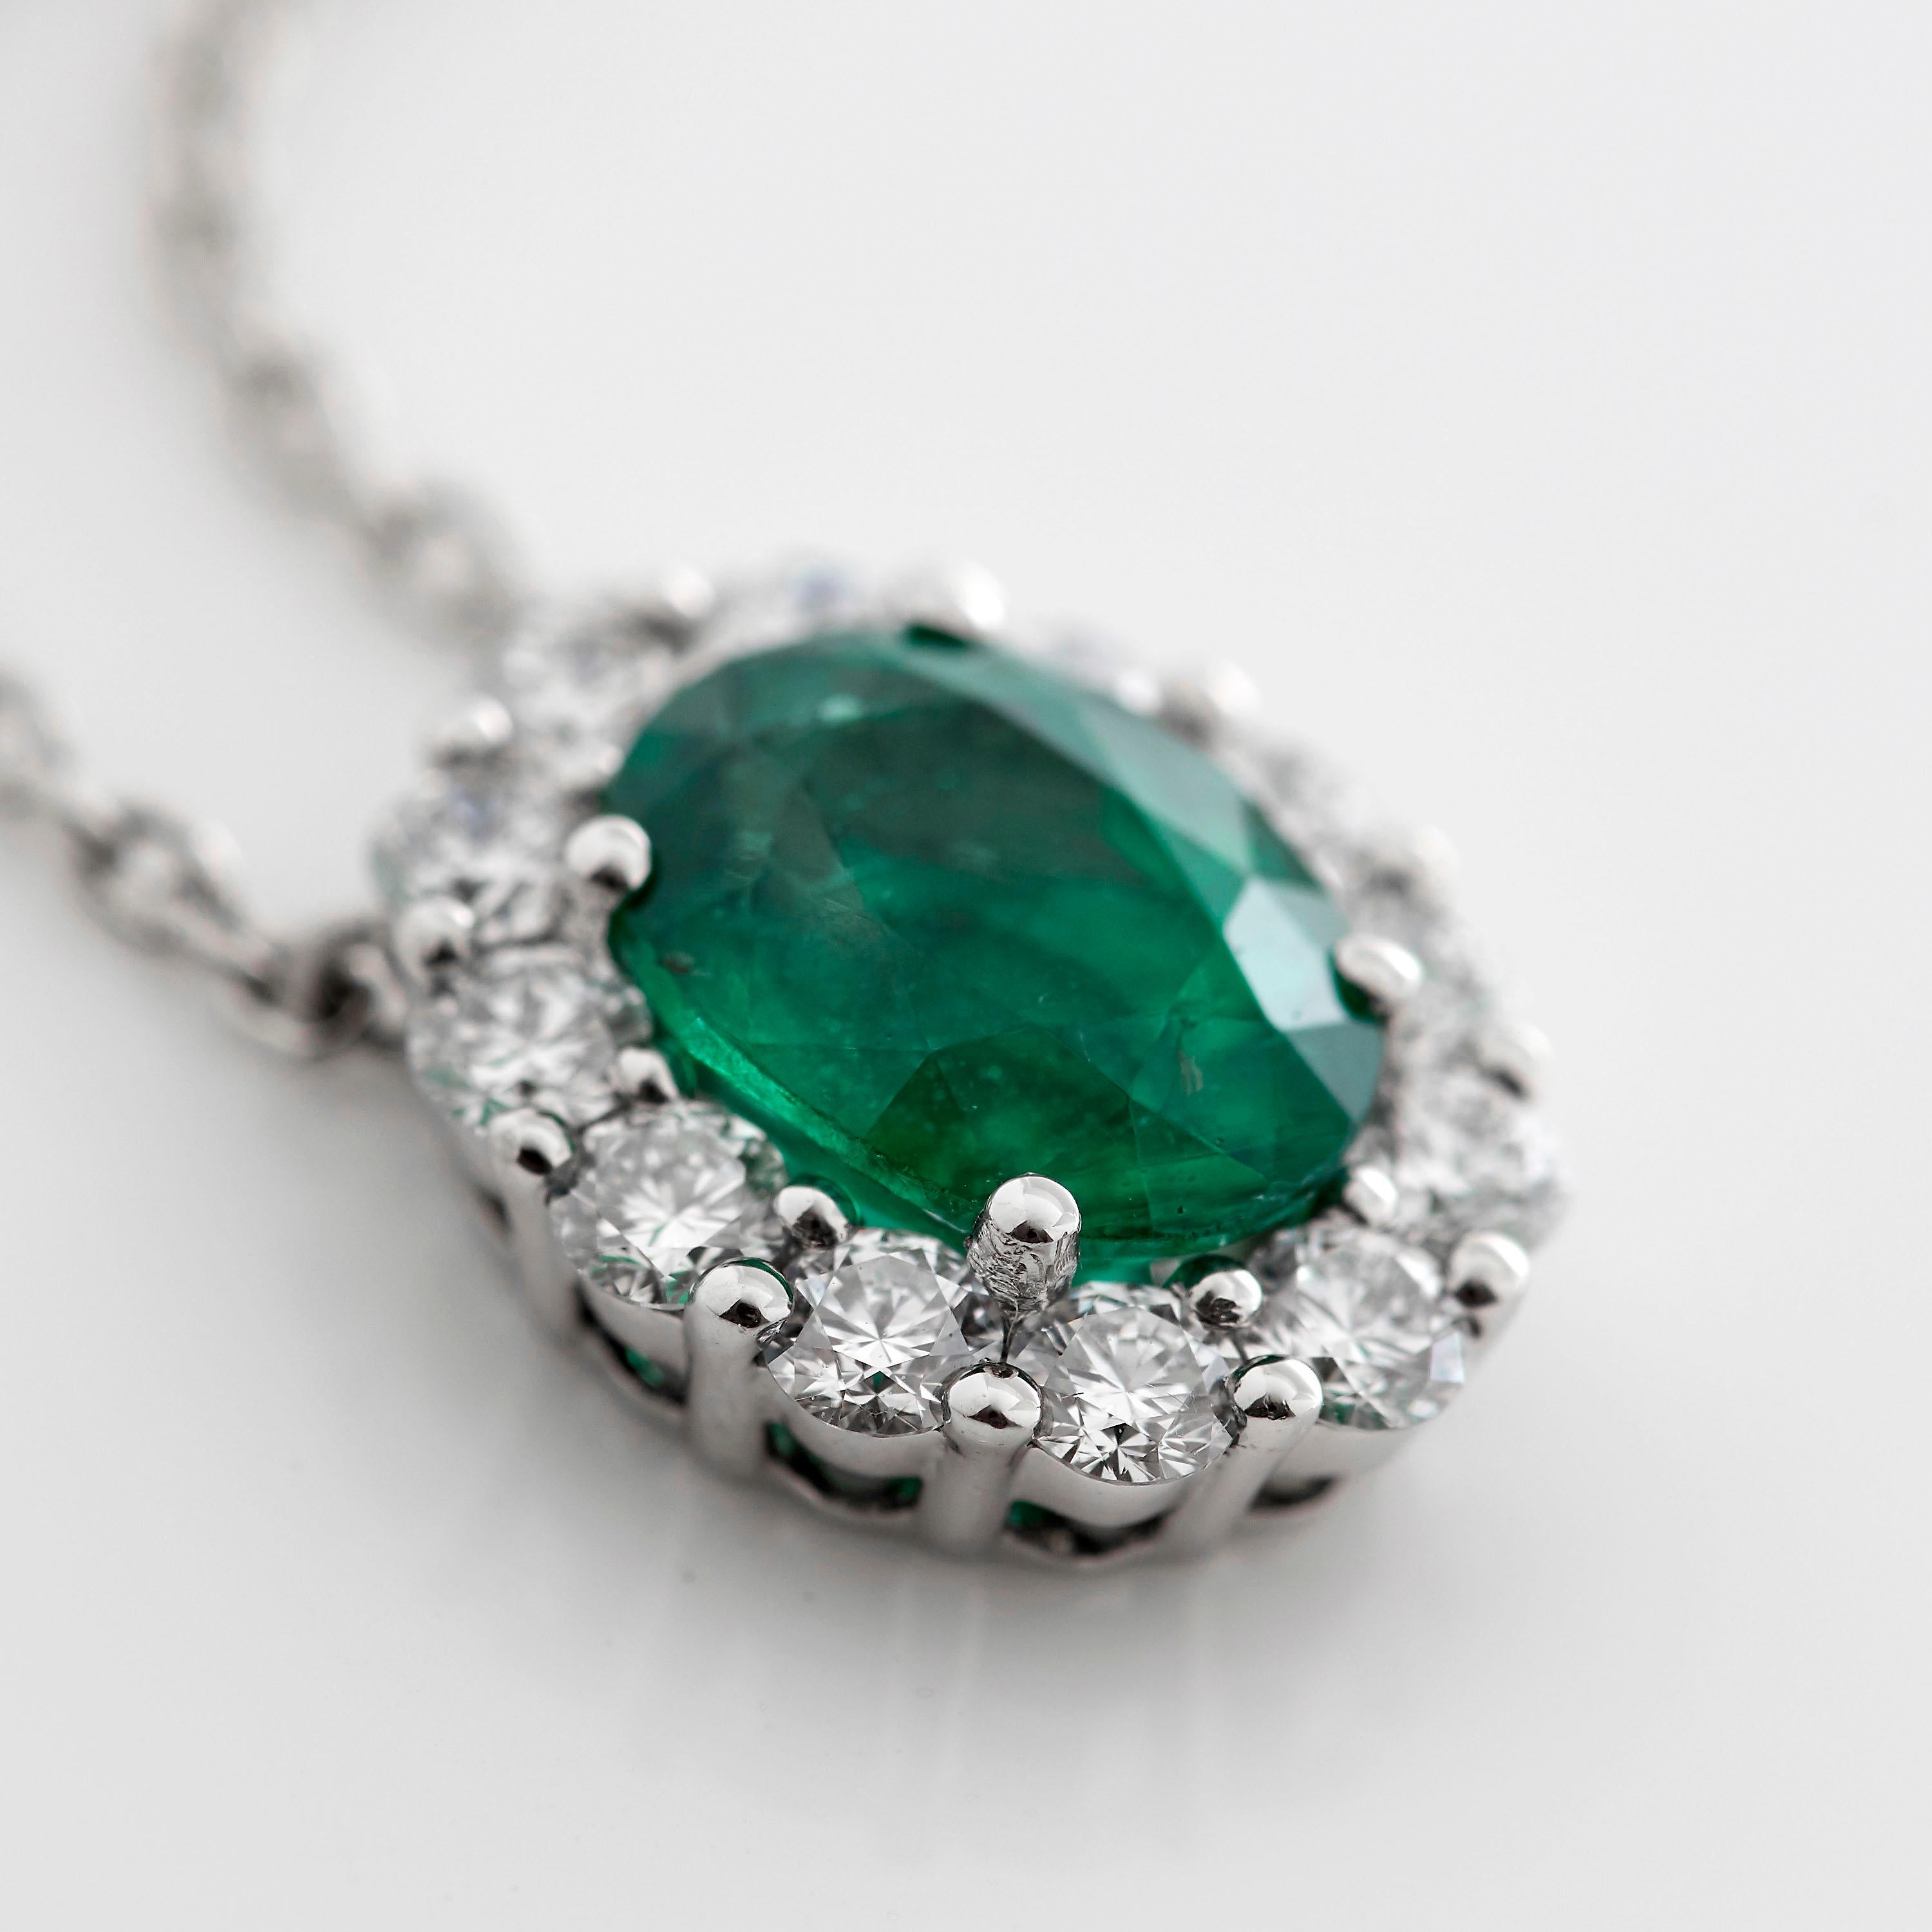 A House of Garrard platinum pendant from the 'Garrard 1735' collection, set with round white diamonds and a central oval emerald.

1 oval emerald weighing: 1.57cts
GIA certified, Mozambique, Heated
12 round white diamonds weighing: 0.52cts

The